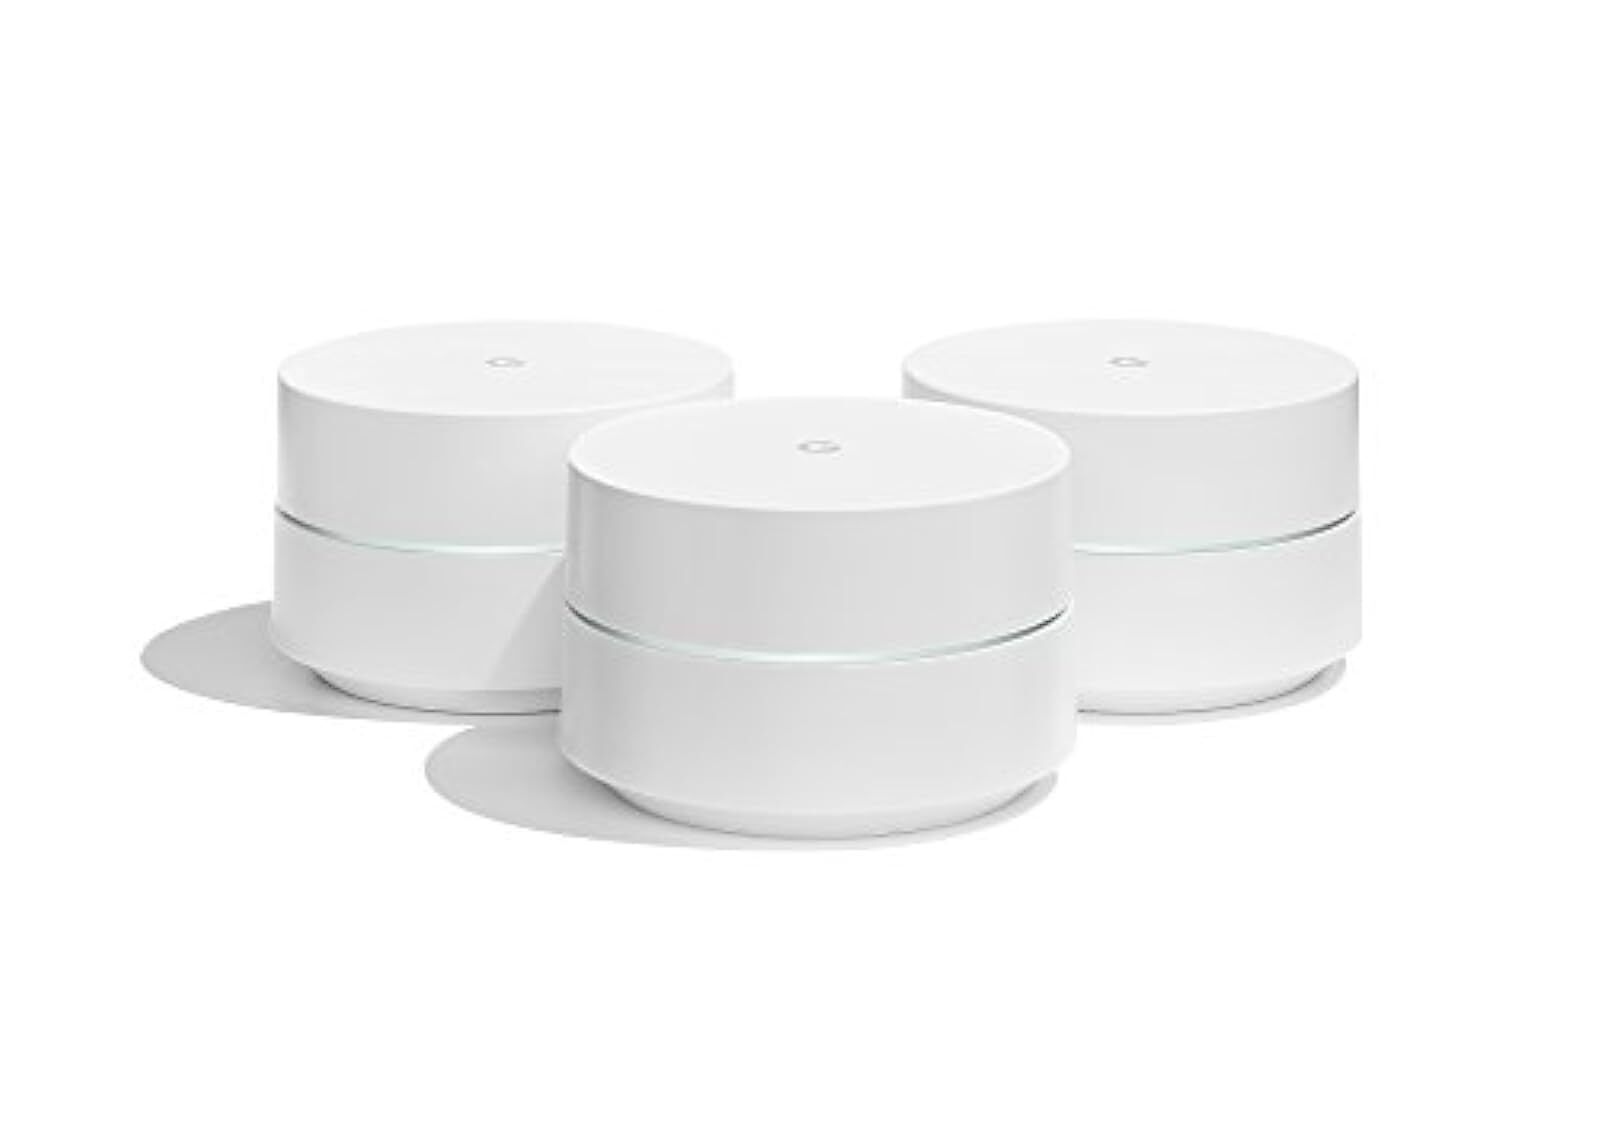 Google Nest Wifi System 3-pack Router Replacement For Whole Home Coverage